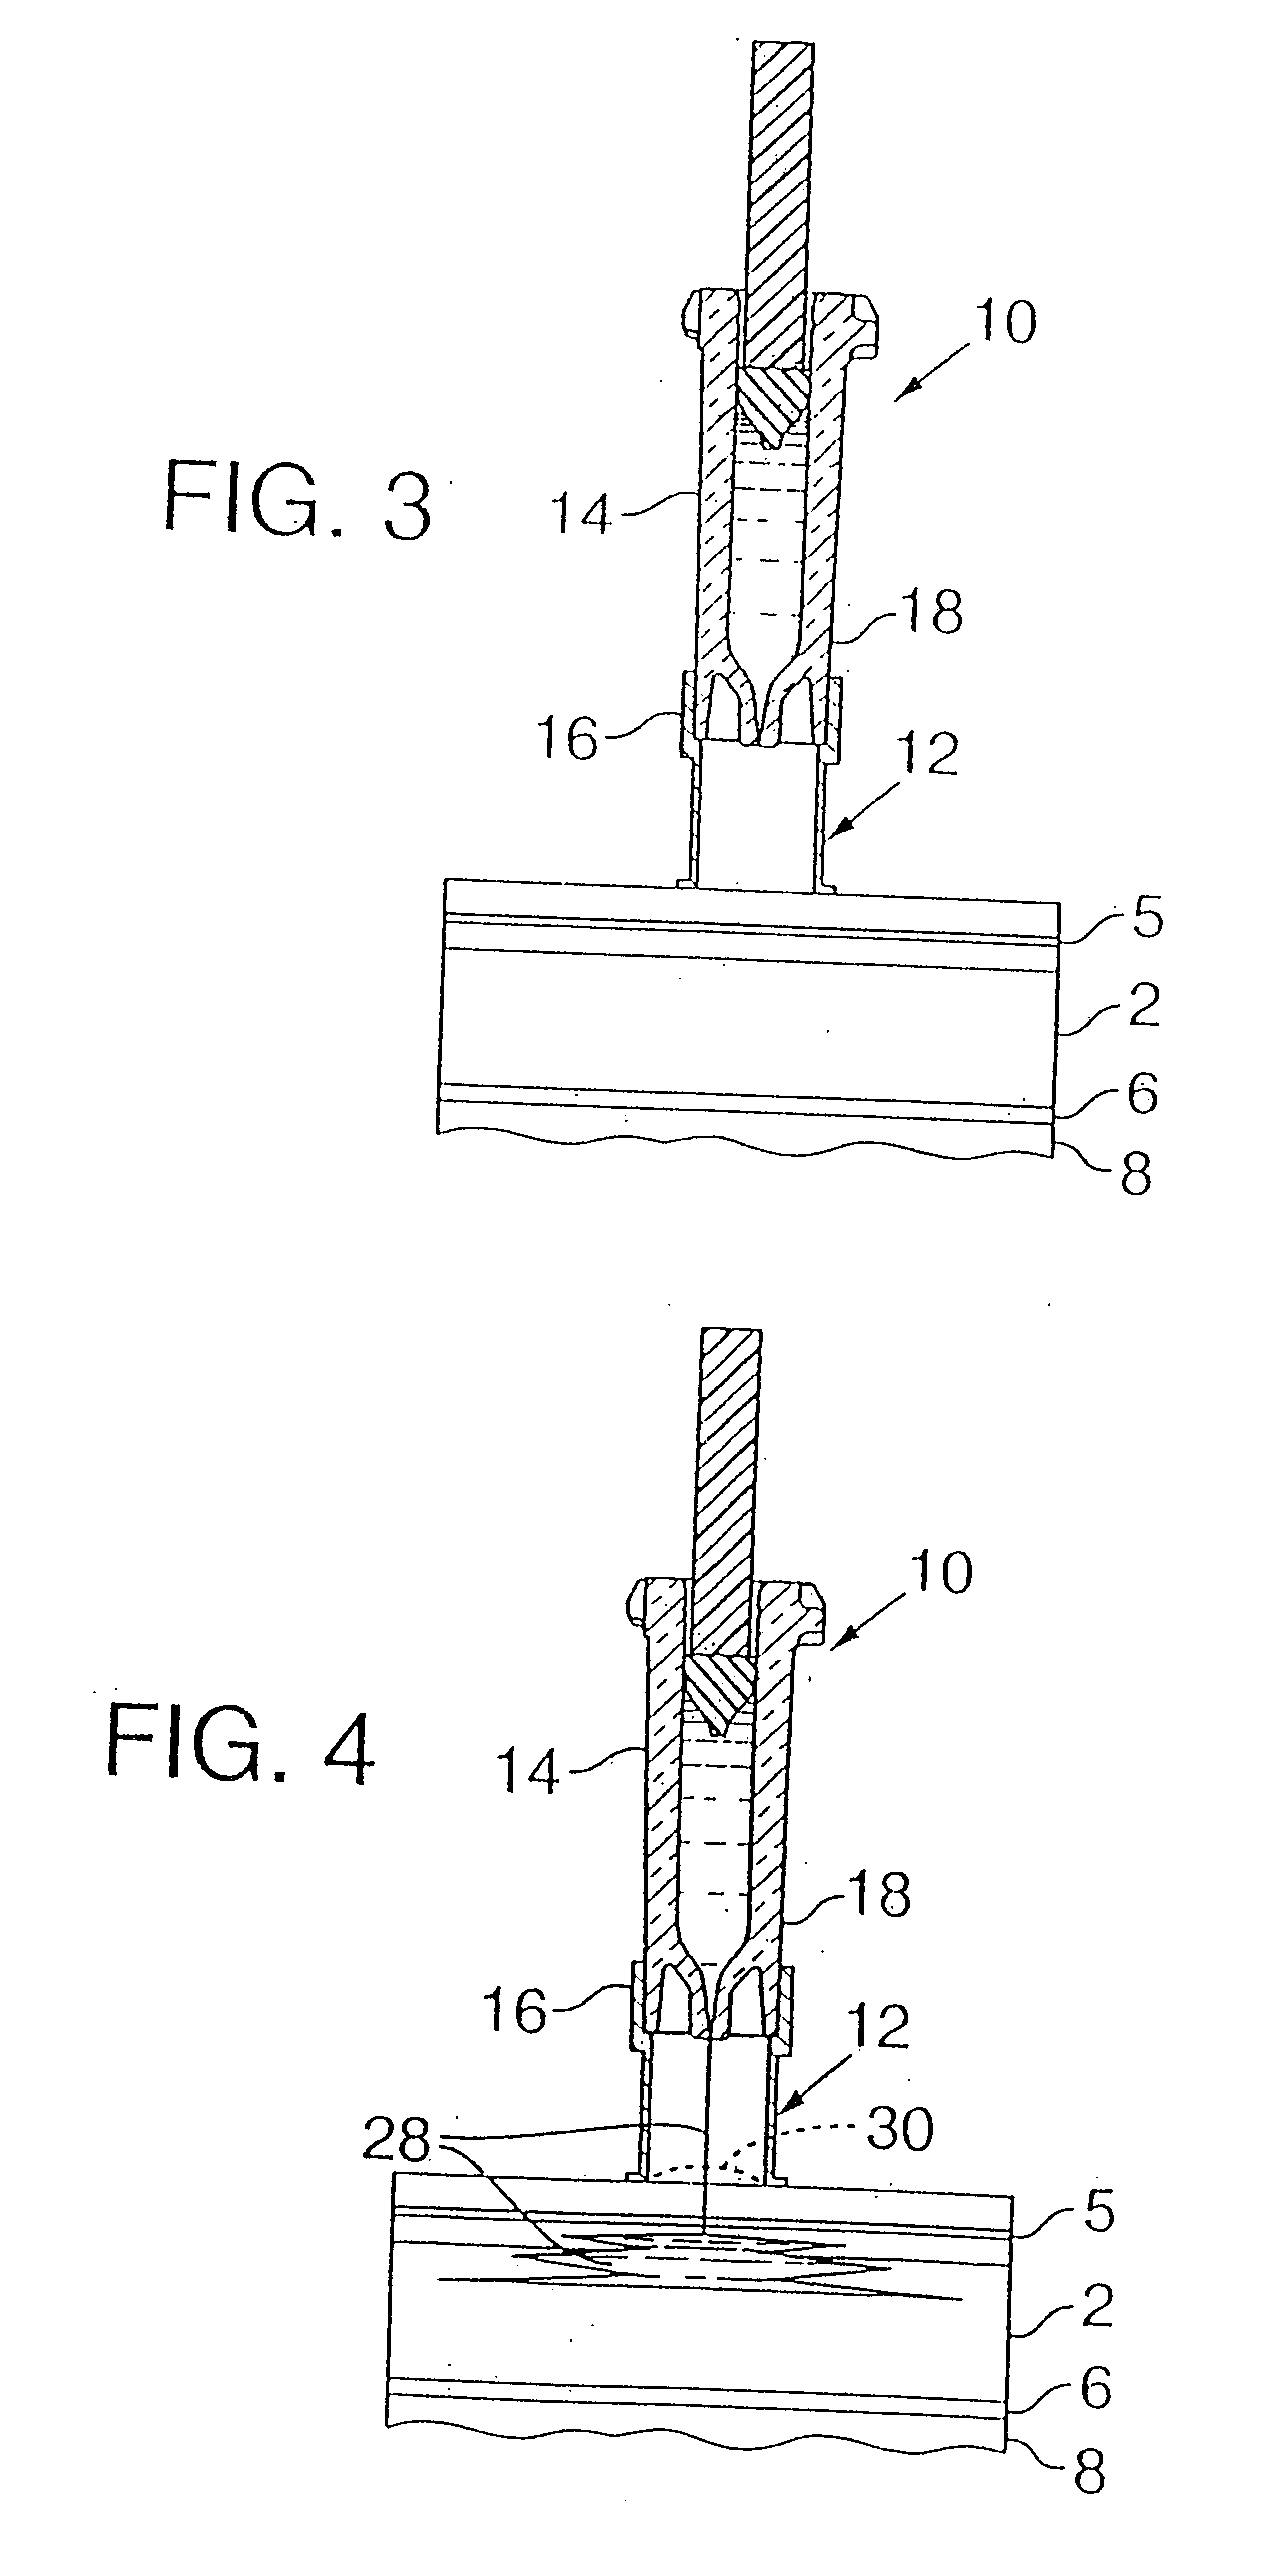 Intradermal injection system for injecting DNA-based injectables into humans